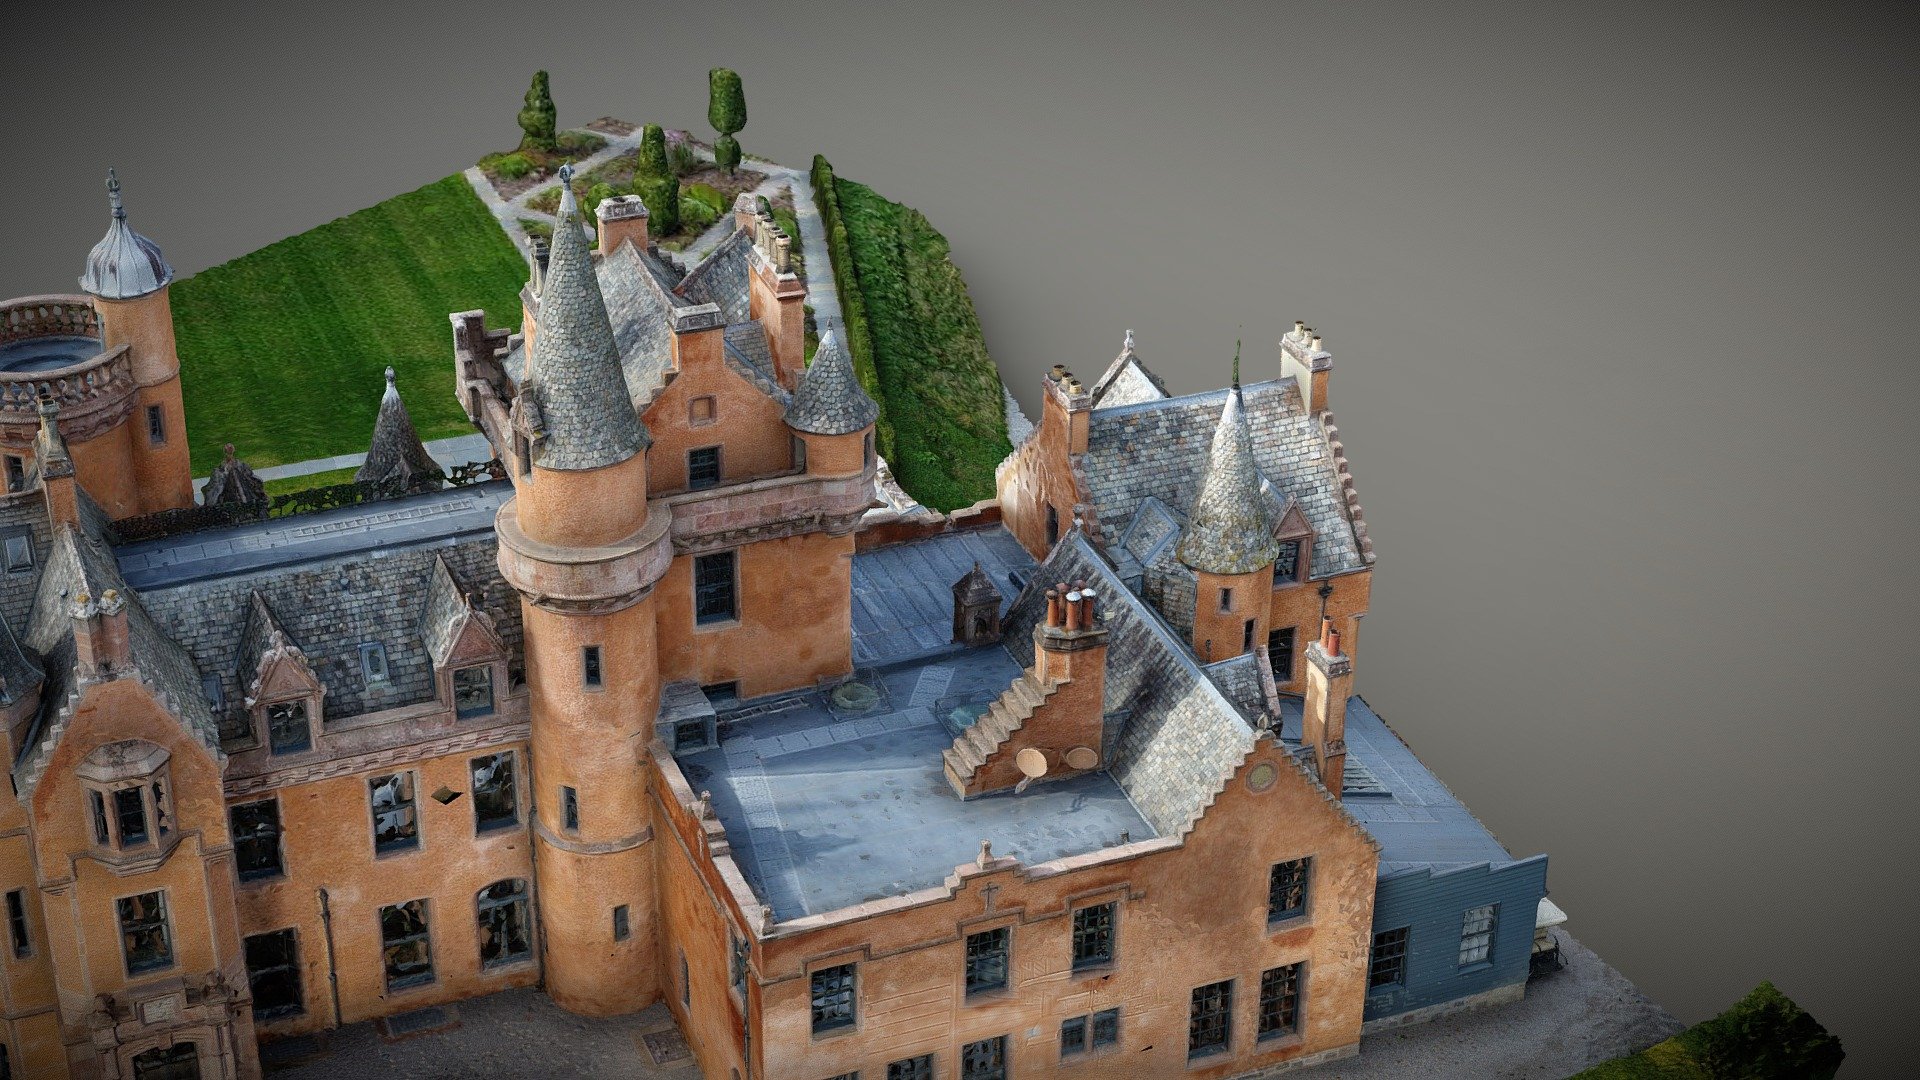 3D model exploring 3d modelling by drone. This model is of Aldourie Castle, Scottish Highlands. Email contact@dronemediascotland.com all rights reserved 3d model